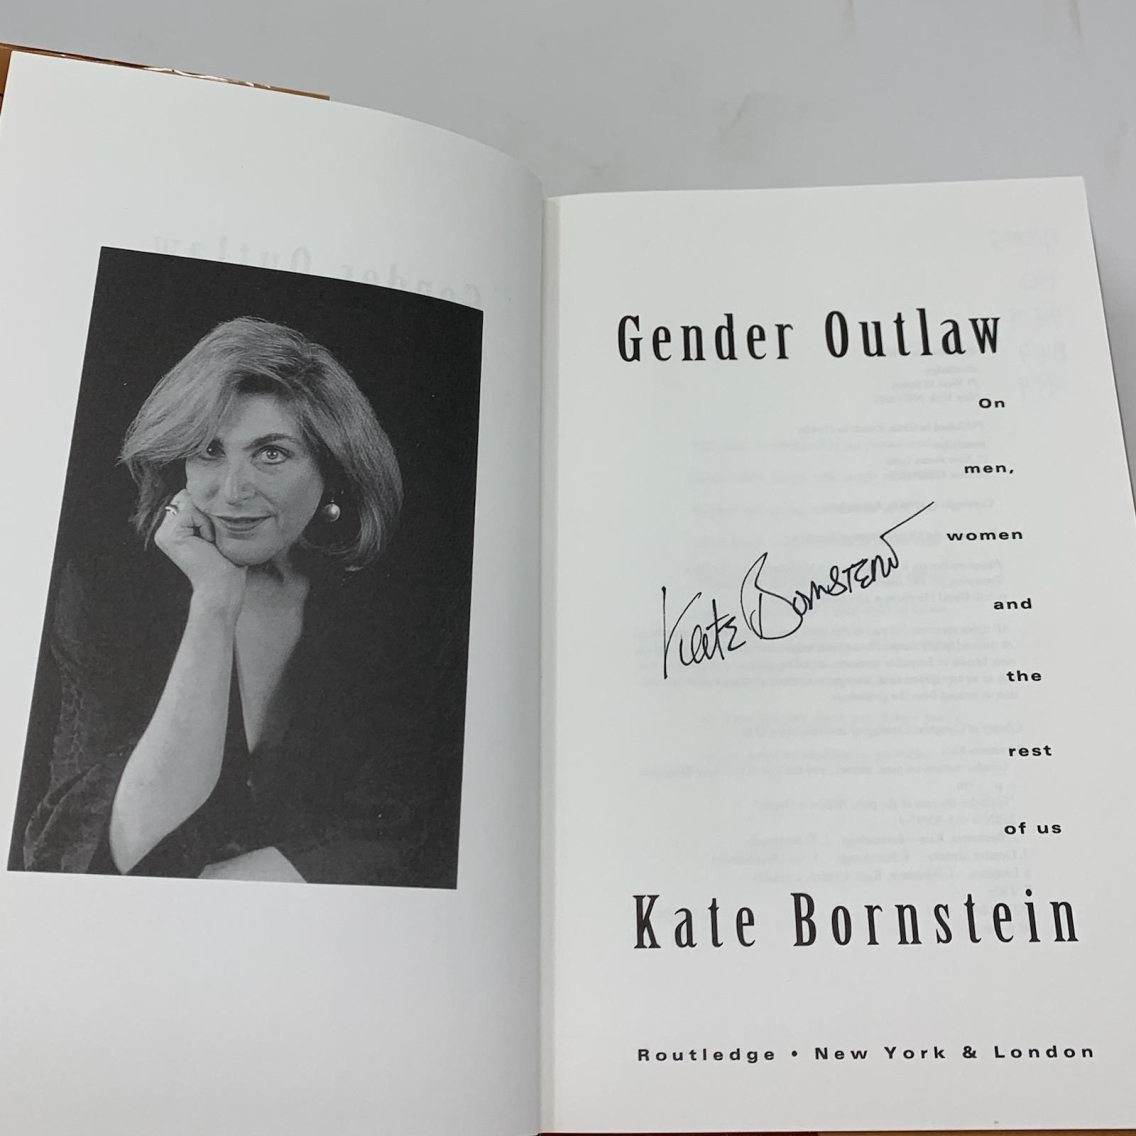 Signed title page of Gender Outlaw by Kate Bornstein